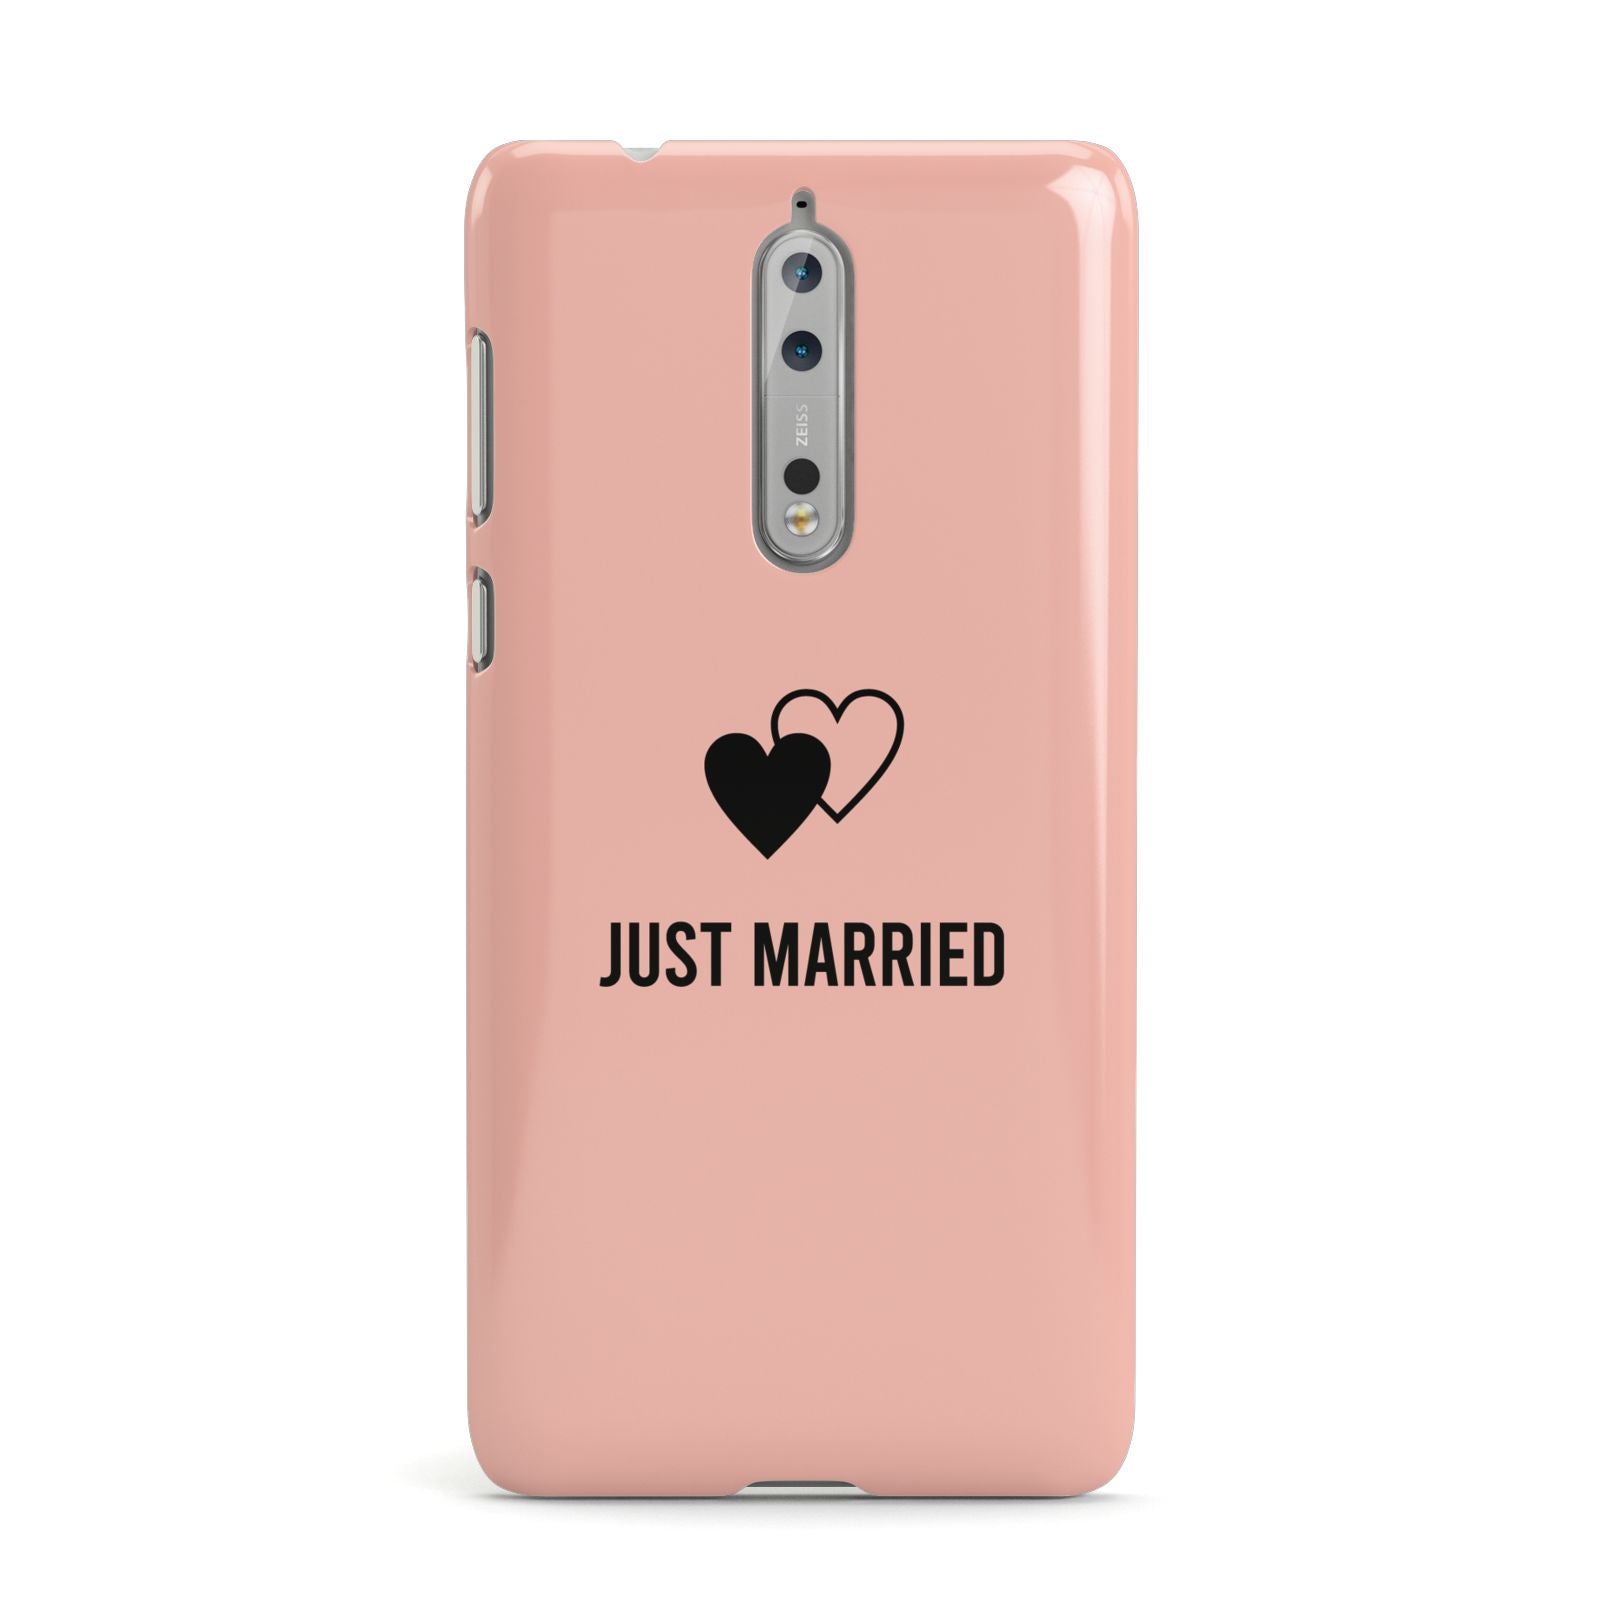 Just Married Nokia Case